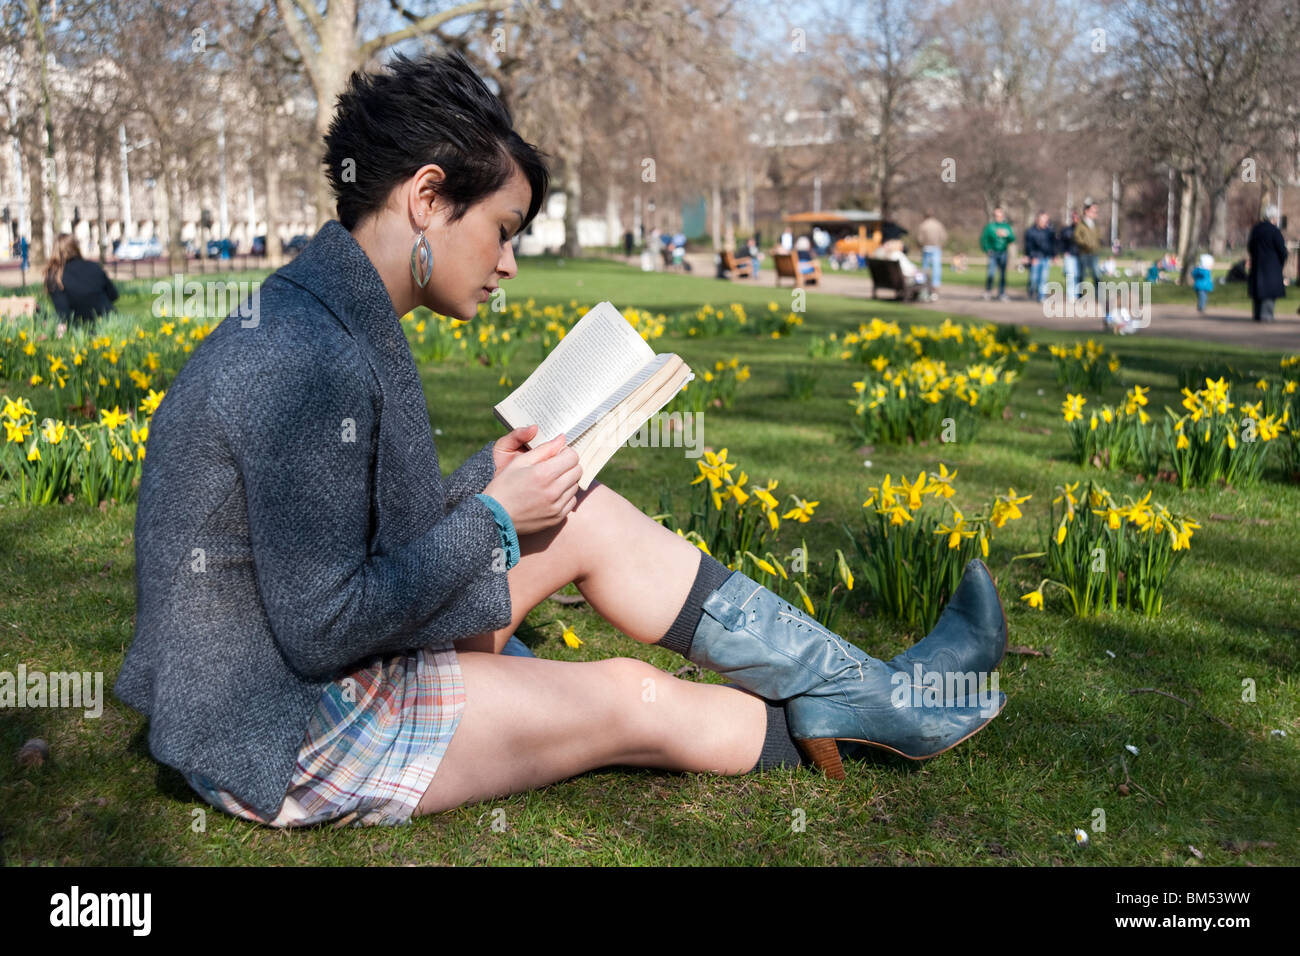 Young woman reading a book in St James's Park, London, England, UK Stock Photo